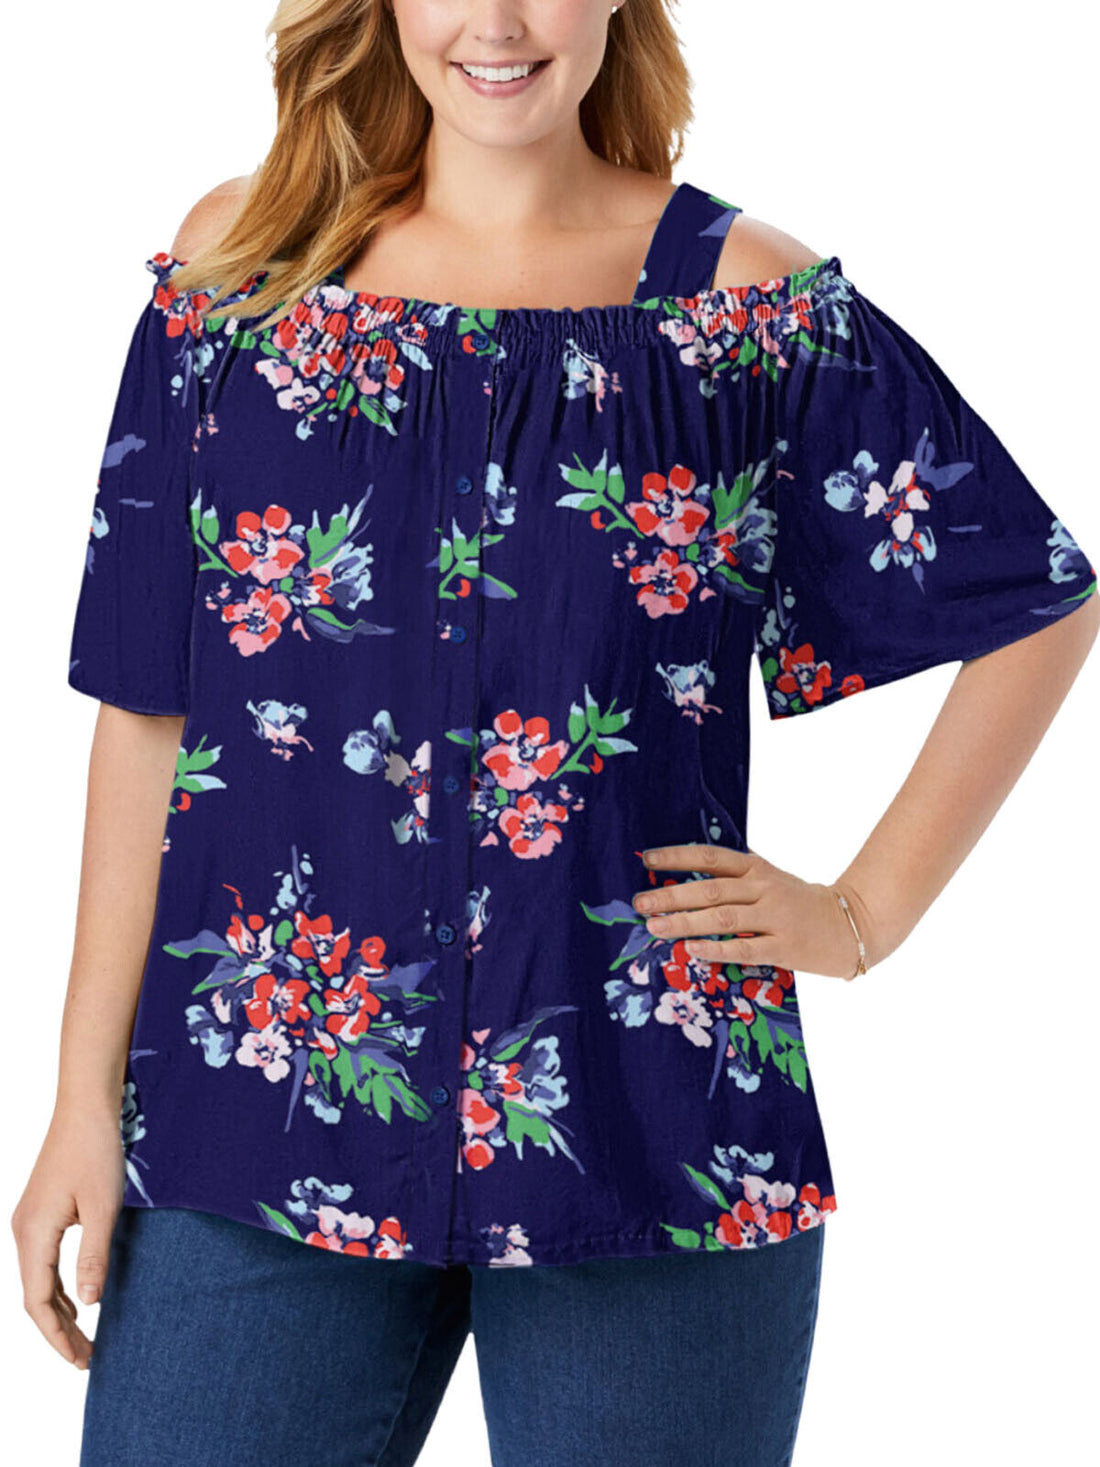 Woman Within Navy Printed Cold Shoulder Blouse 16/18 20/22 28/20 32/34 36/38